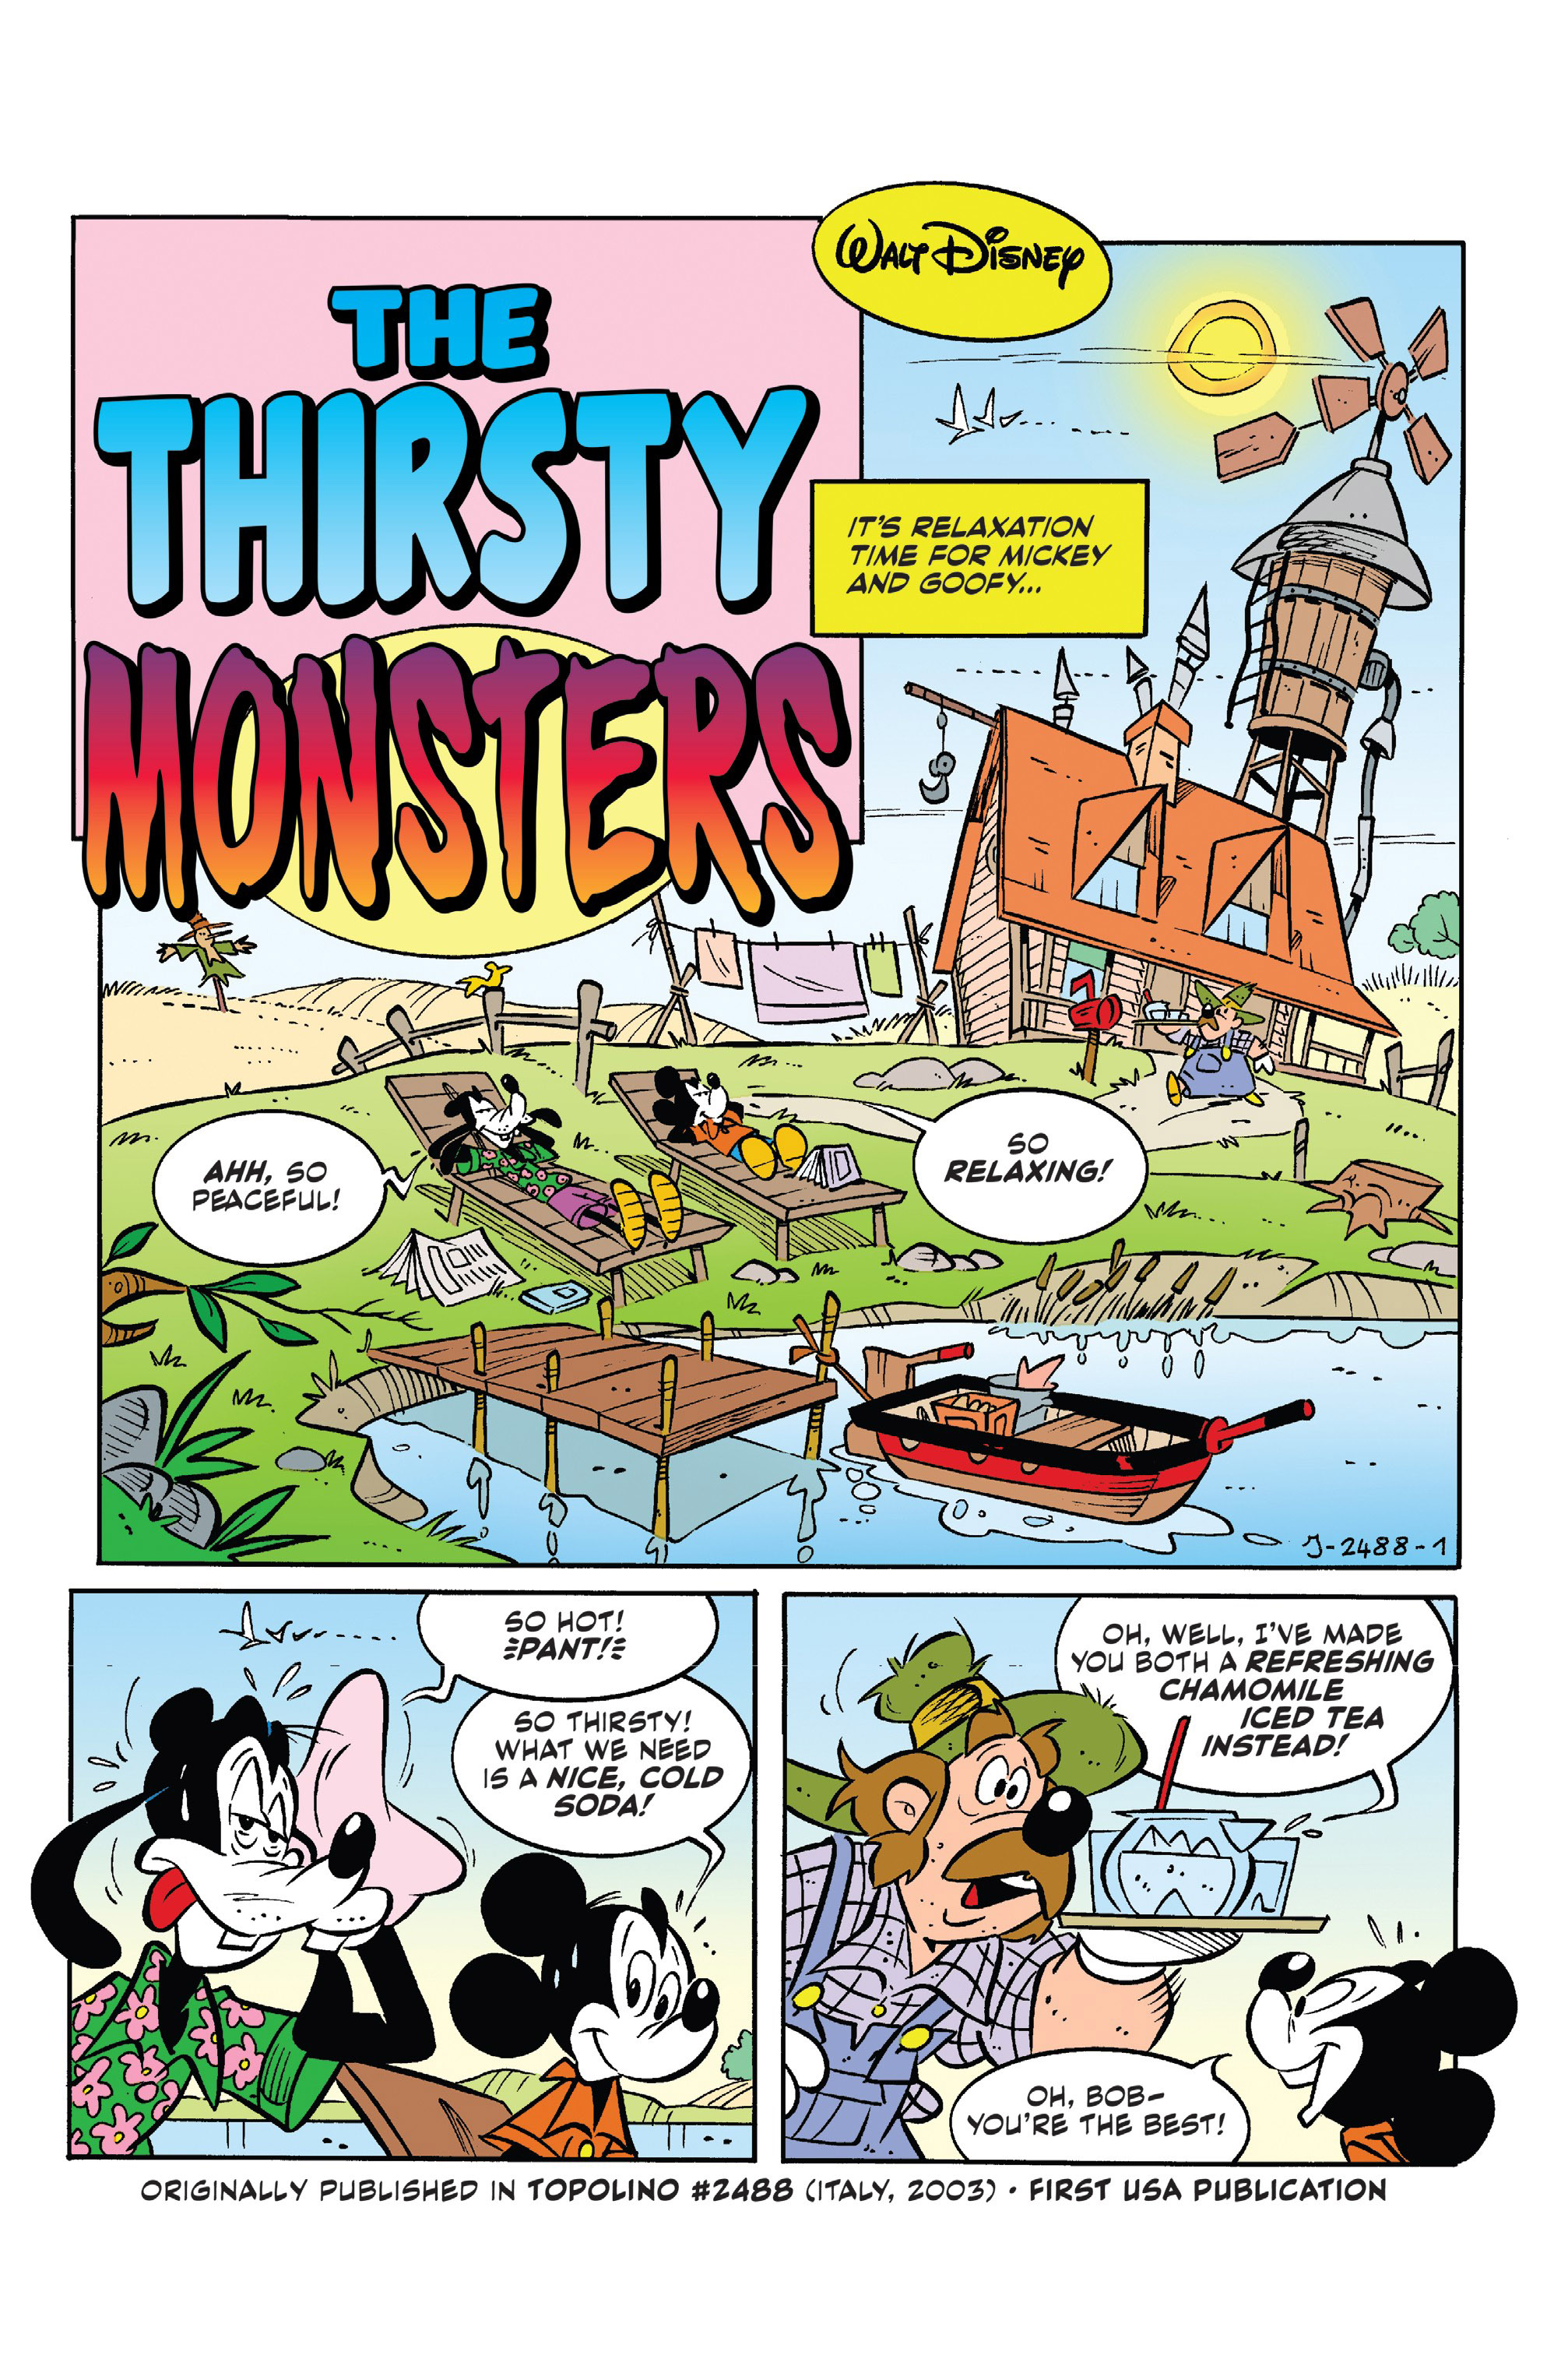 Disney Comics and Stories (2018-): Chapter 5 - Page 3